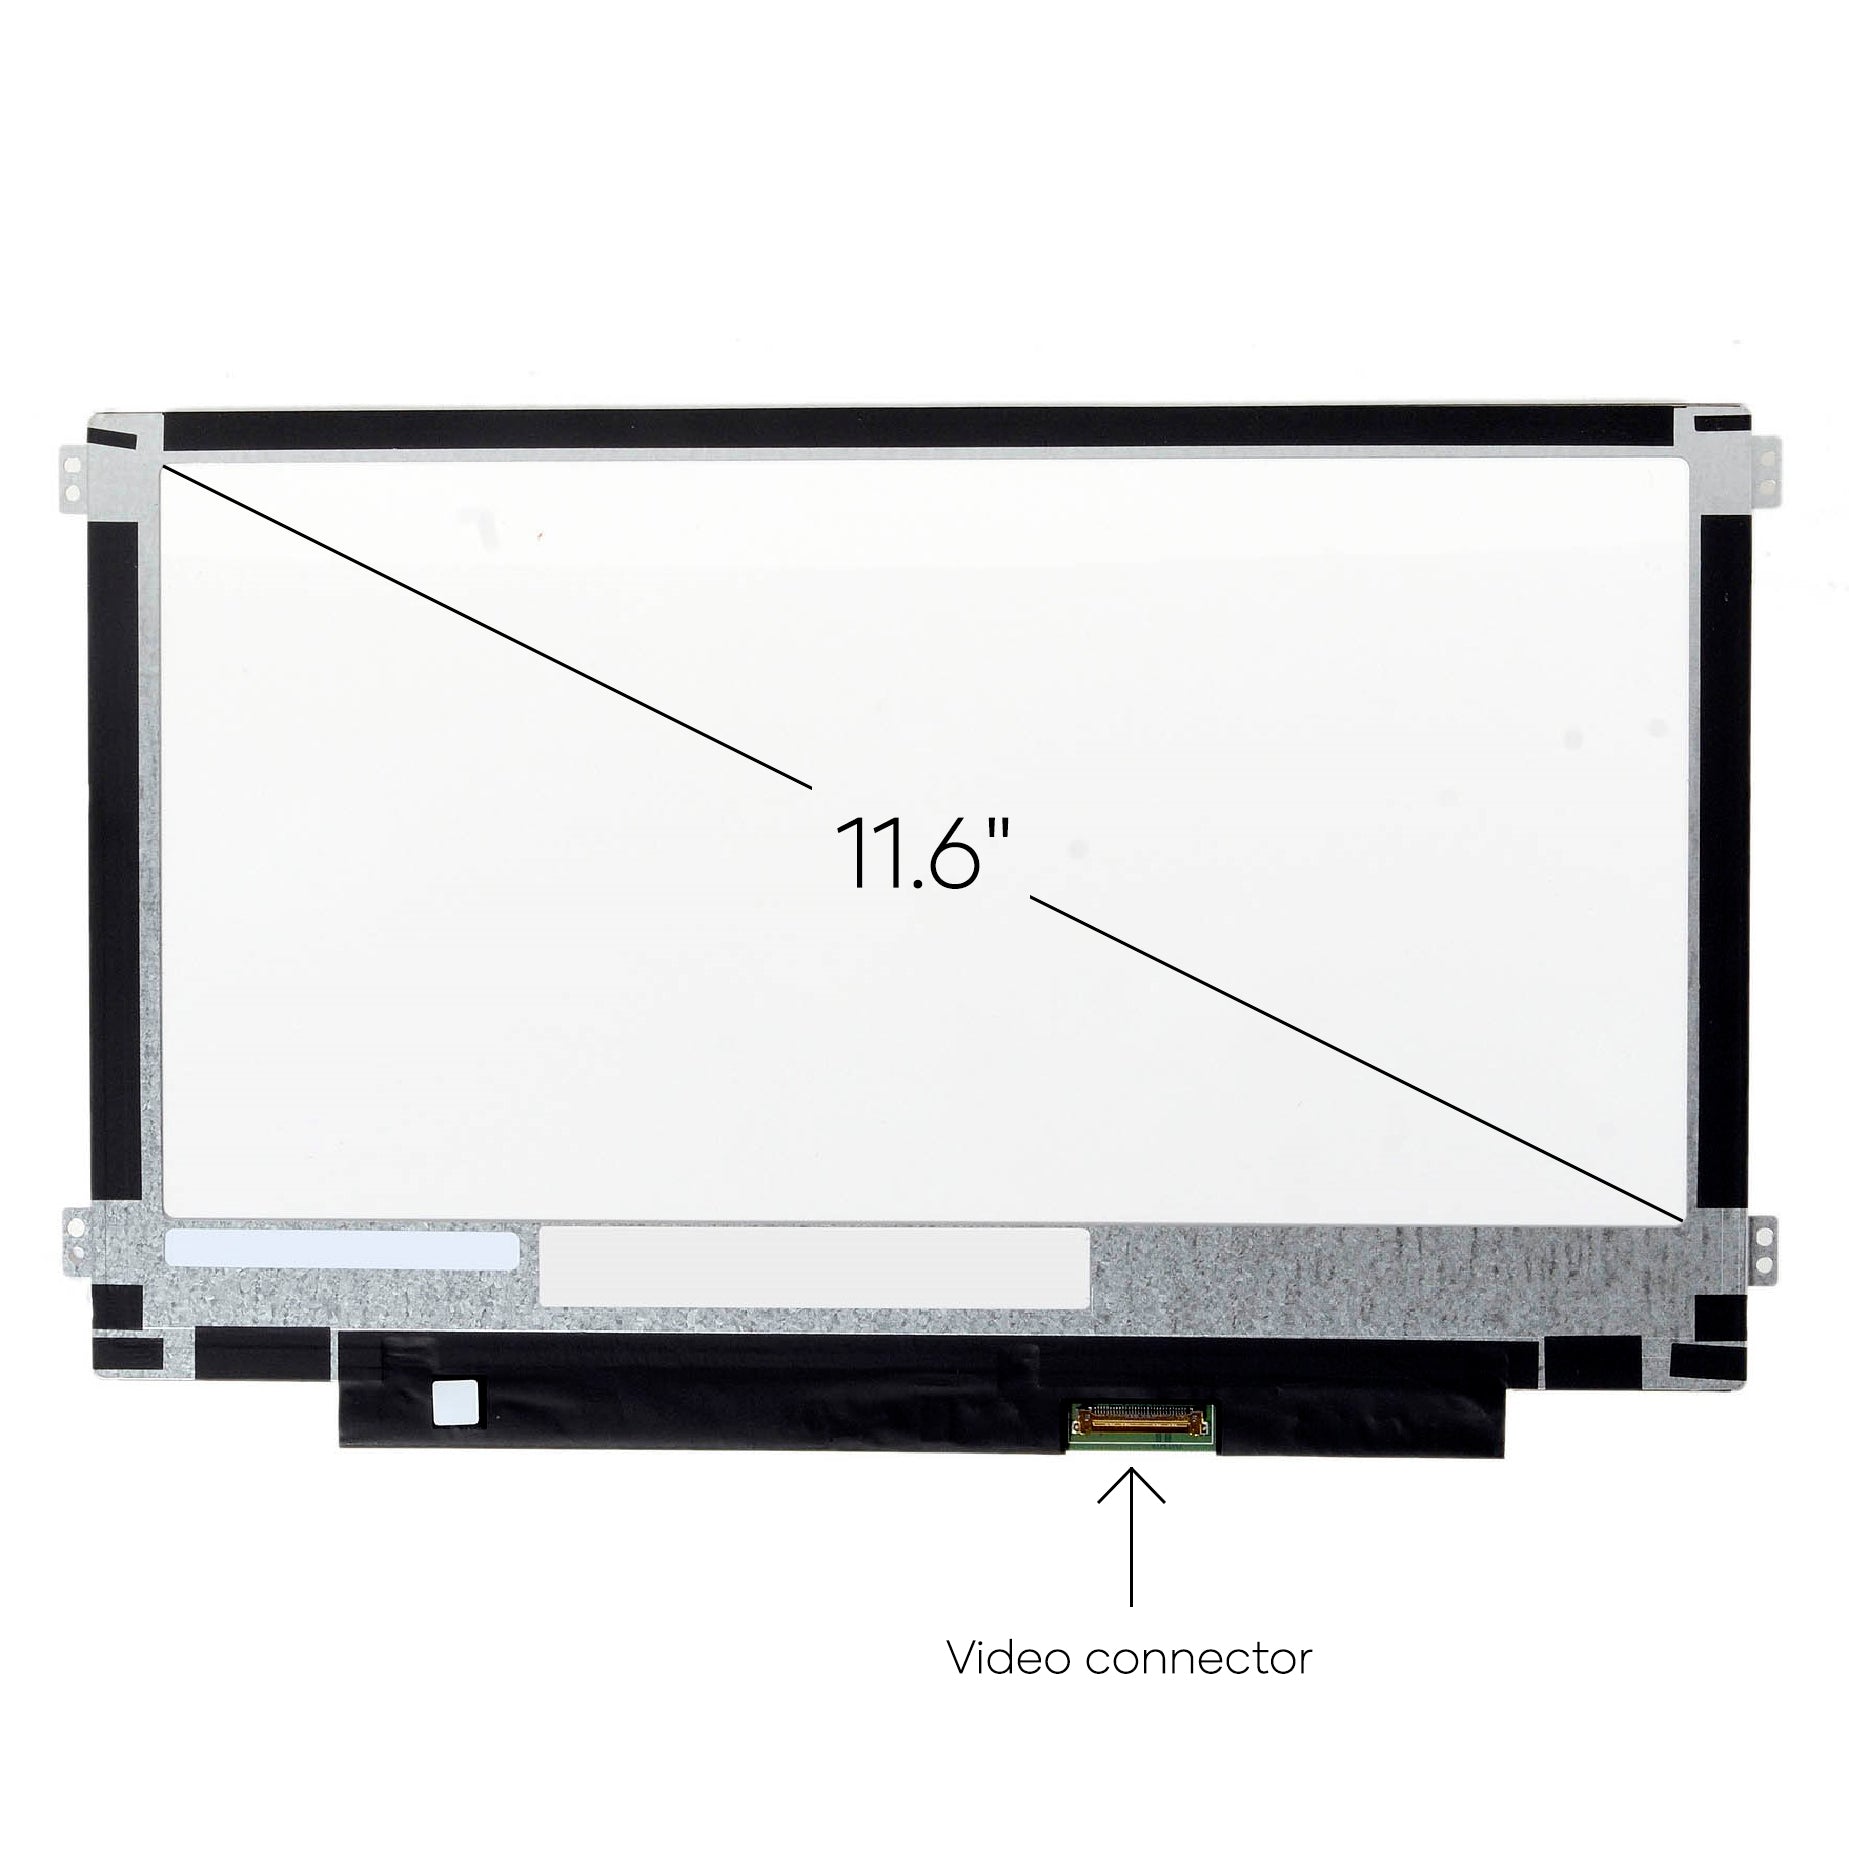 Screen Replacement for Lenovo Chromebook N23 80YS0003US HD 1366x768 Matte LCD LED Display